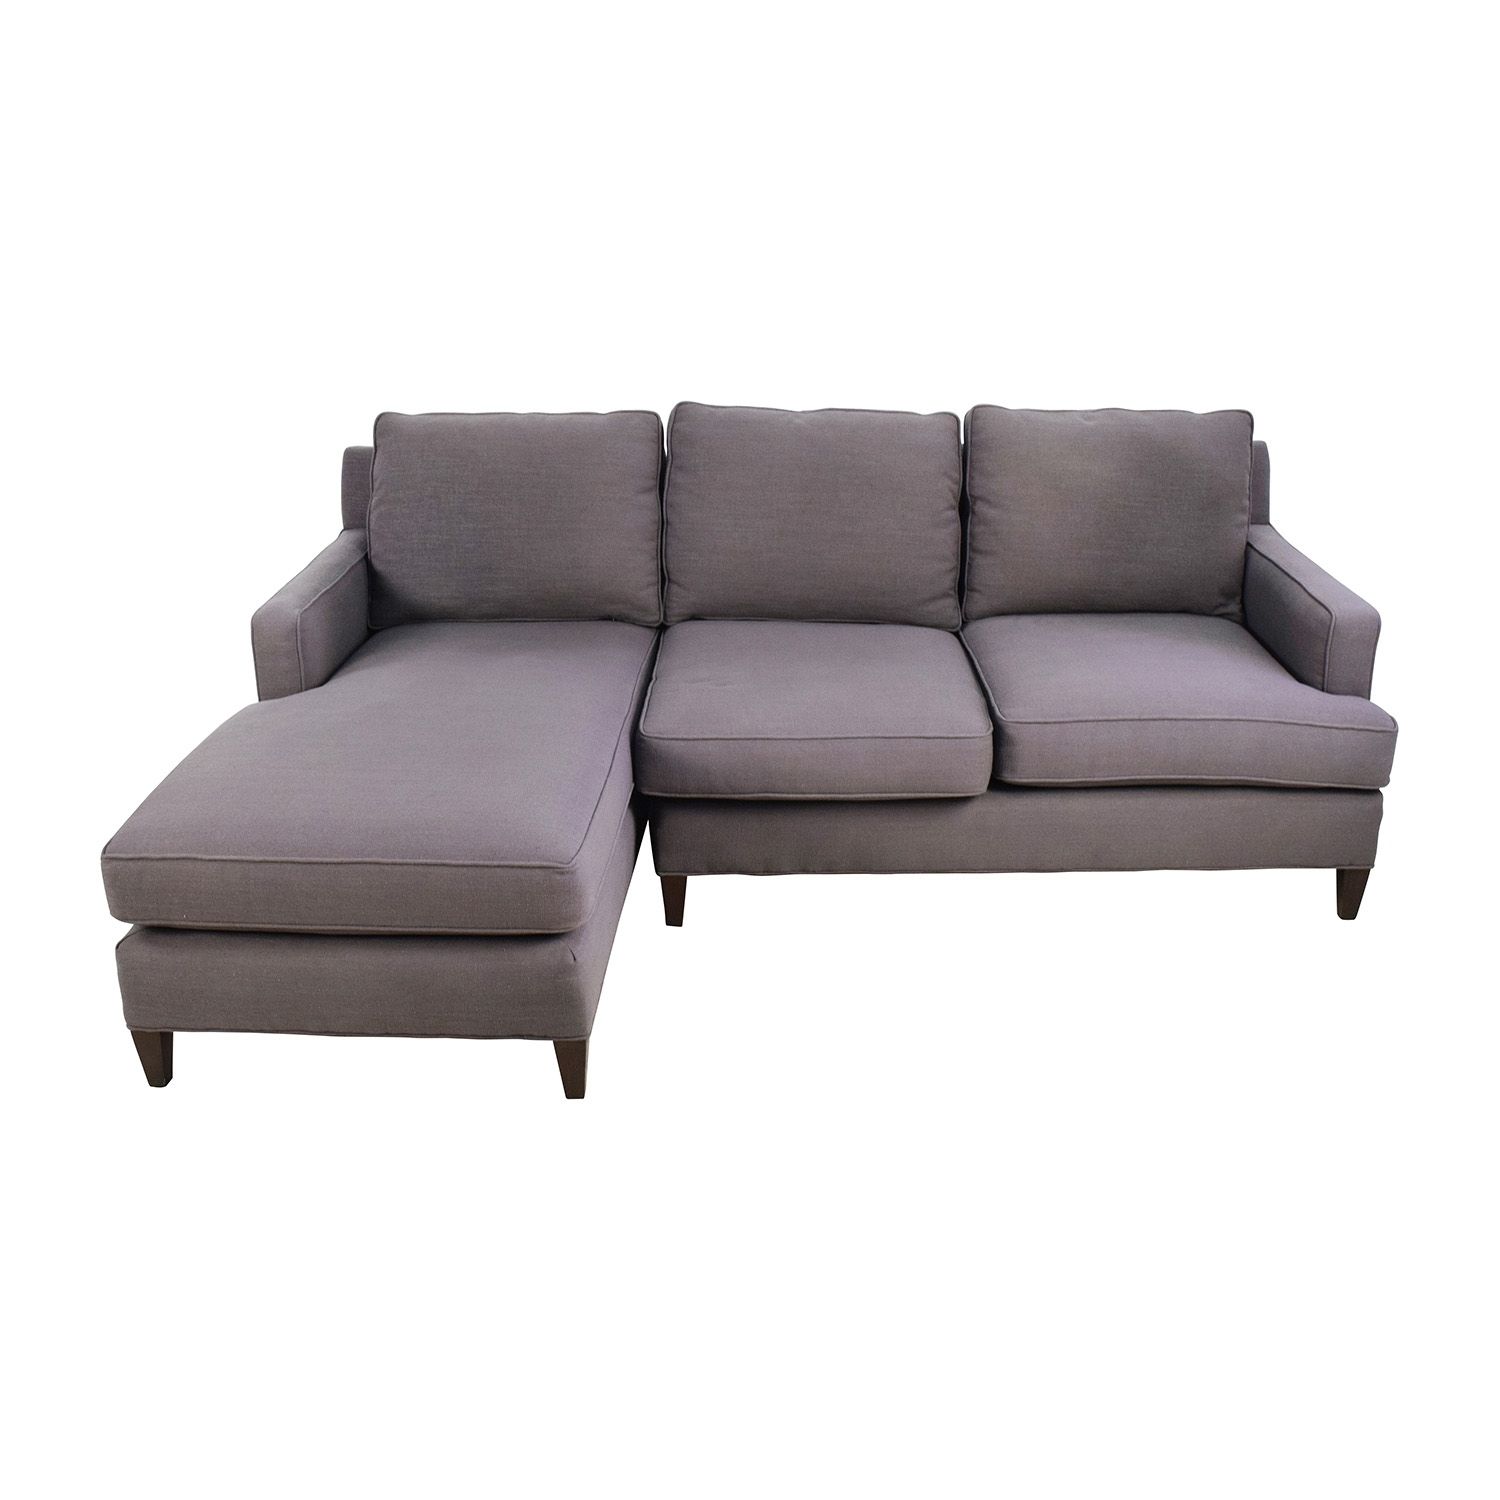 81% Off – Mitchell Gold & Bob Williams Mitchell Gold + Bob Williams Throughout Charlotte Sectional Sofas (Photo 7 of 10)